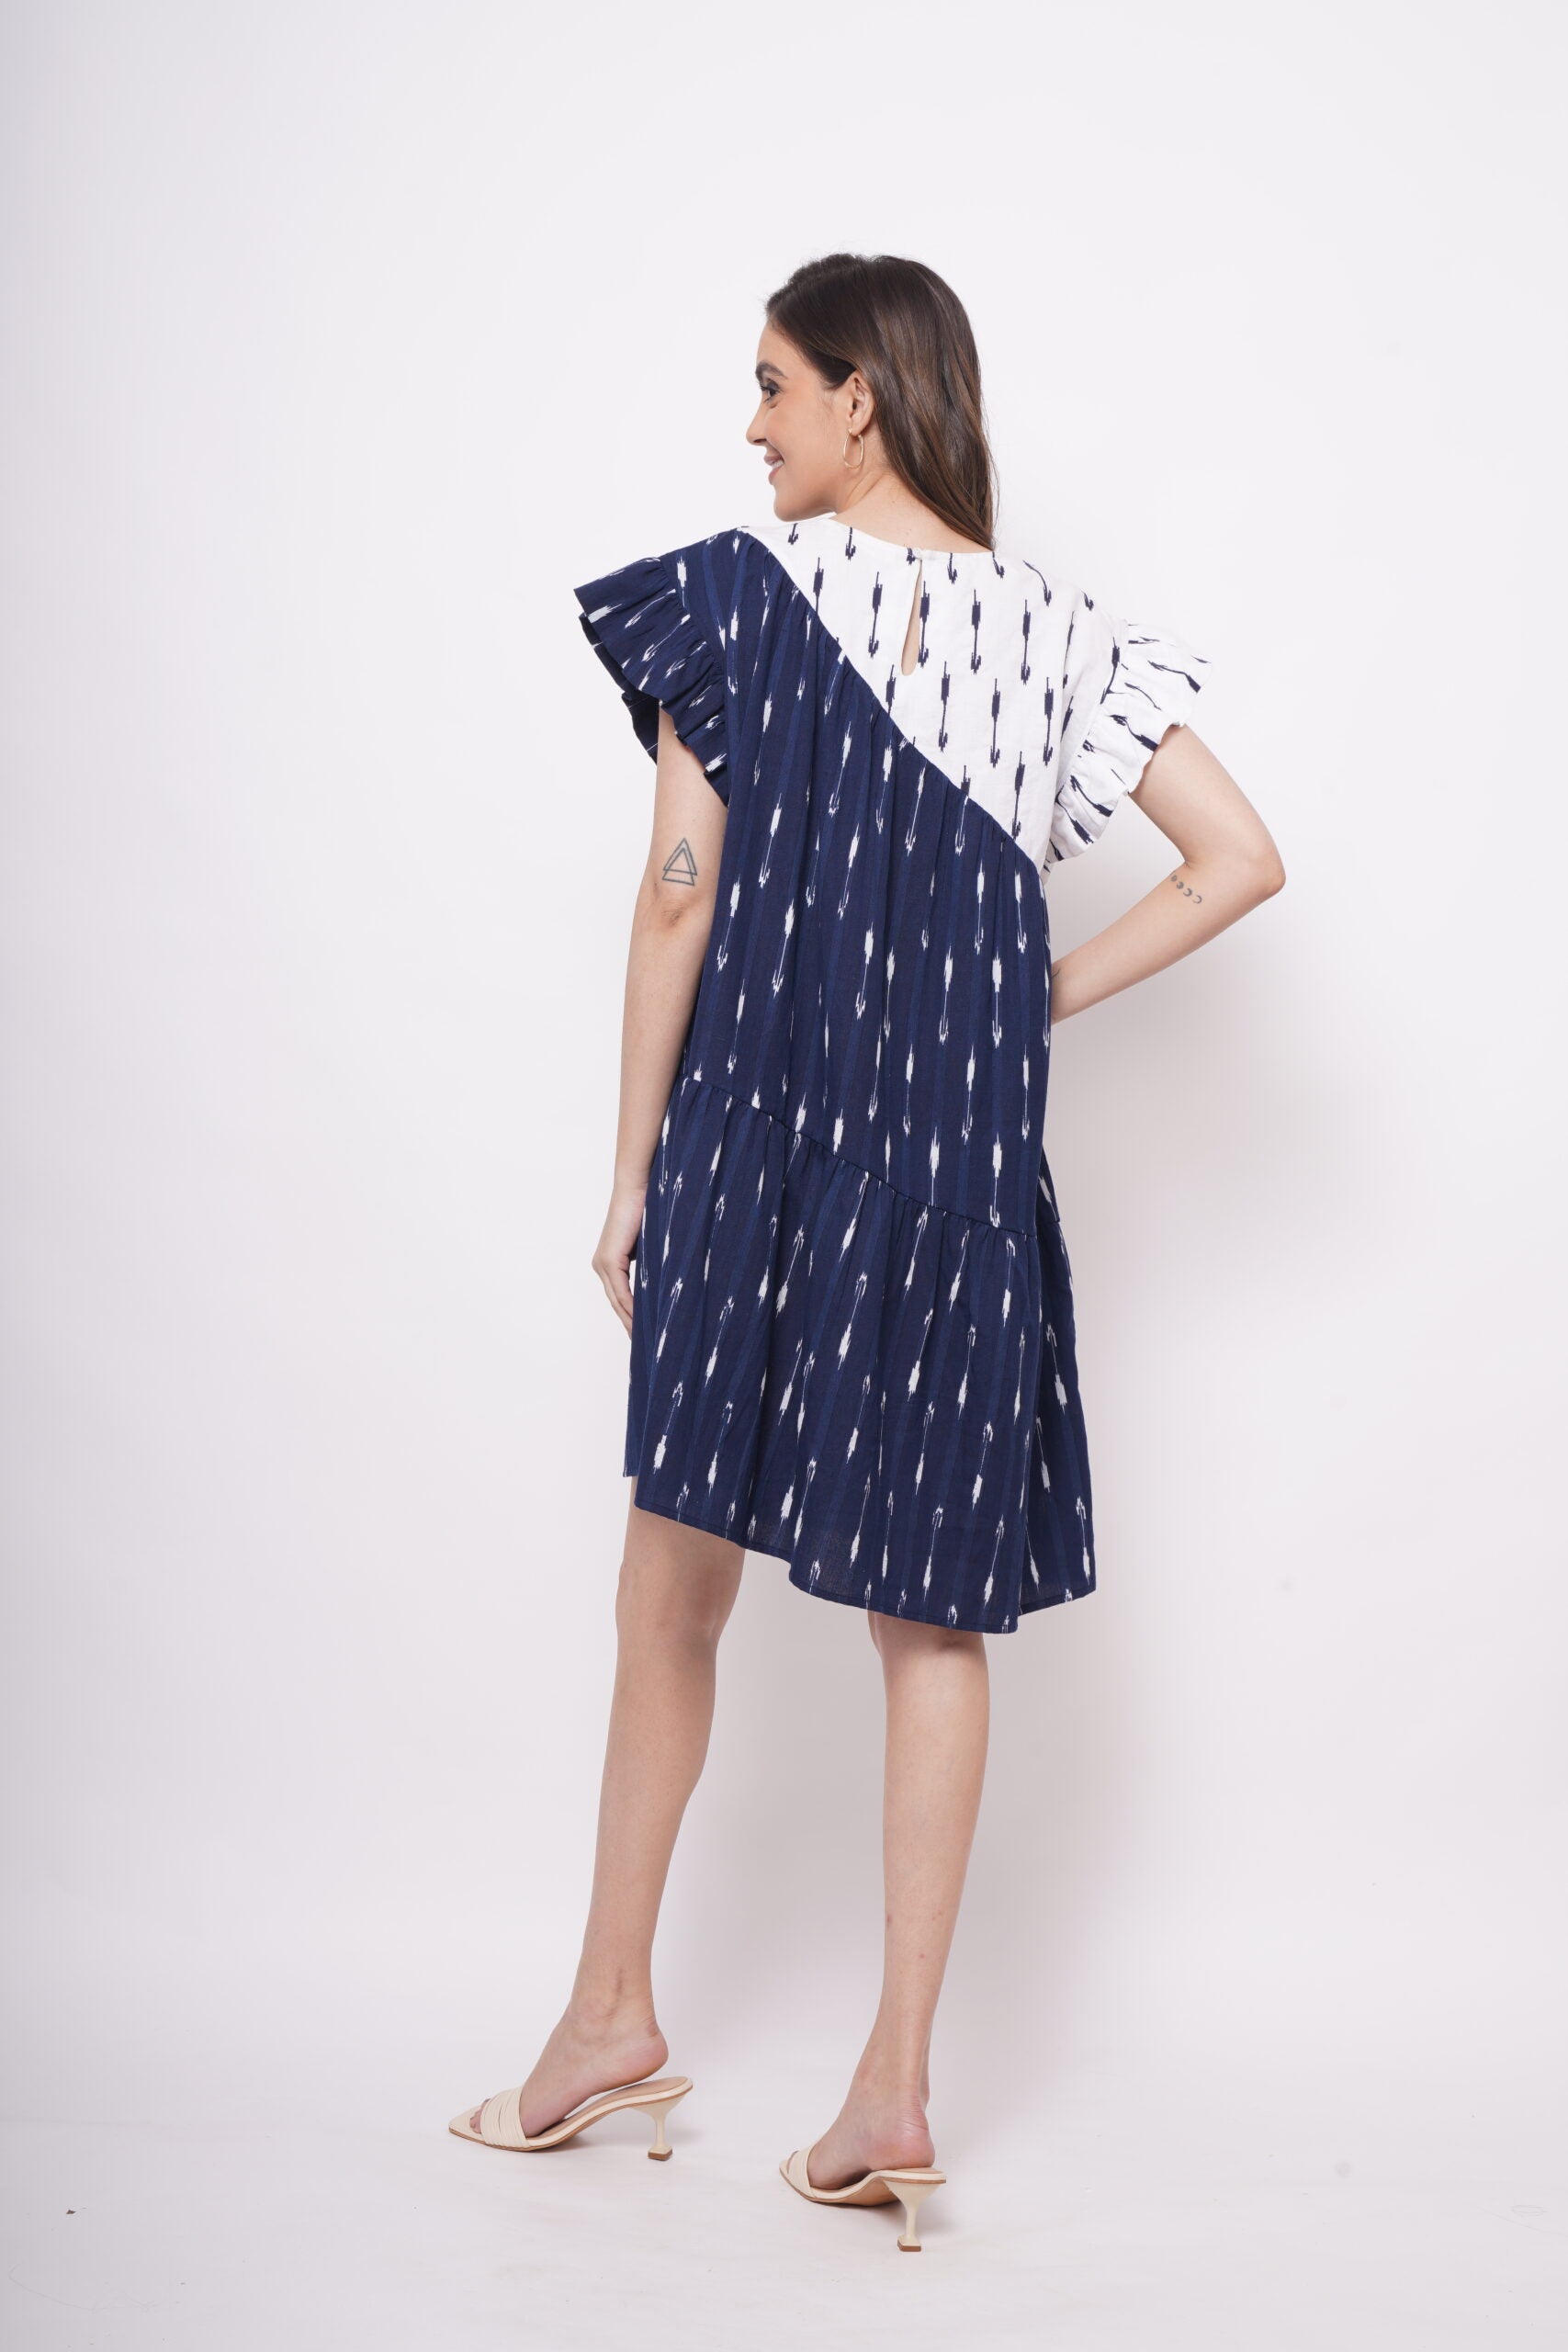 Patch Embroidered Oversized Dress - Western Era  Dresses